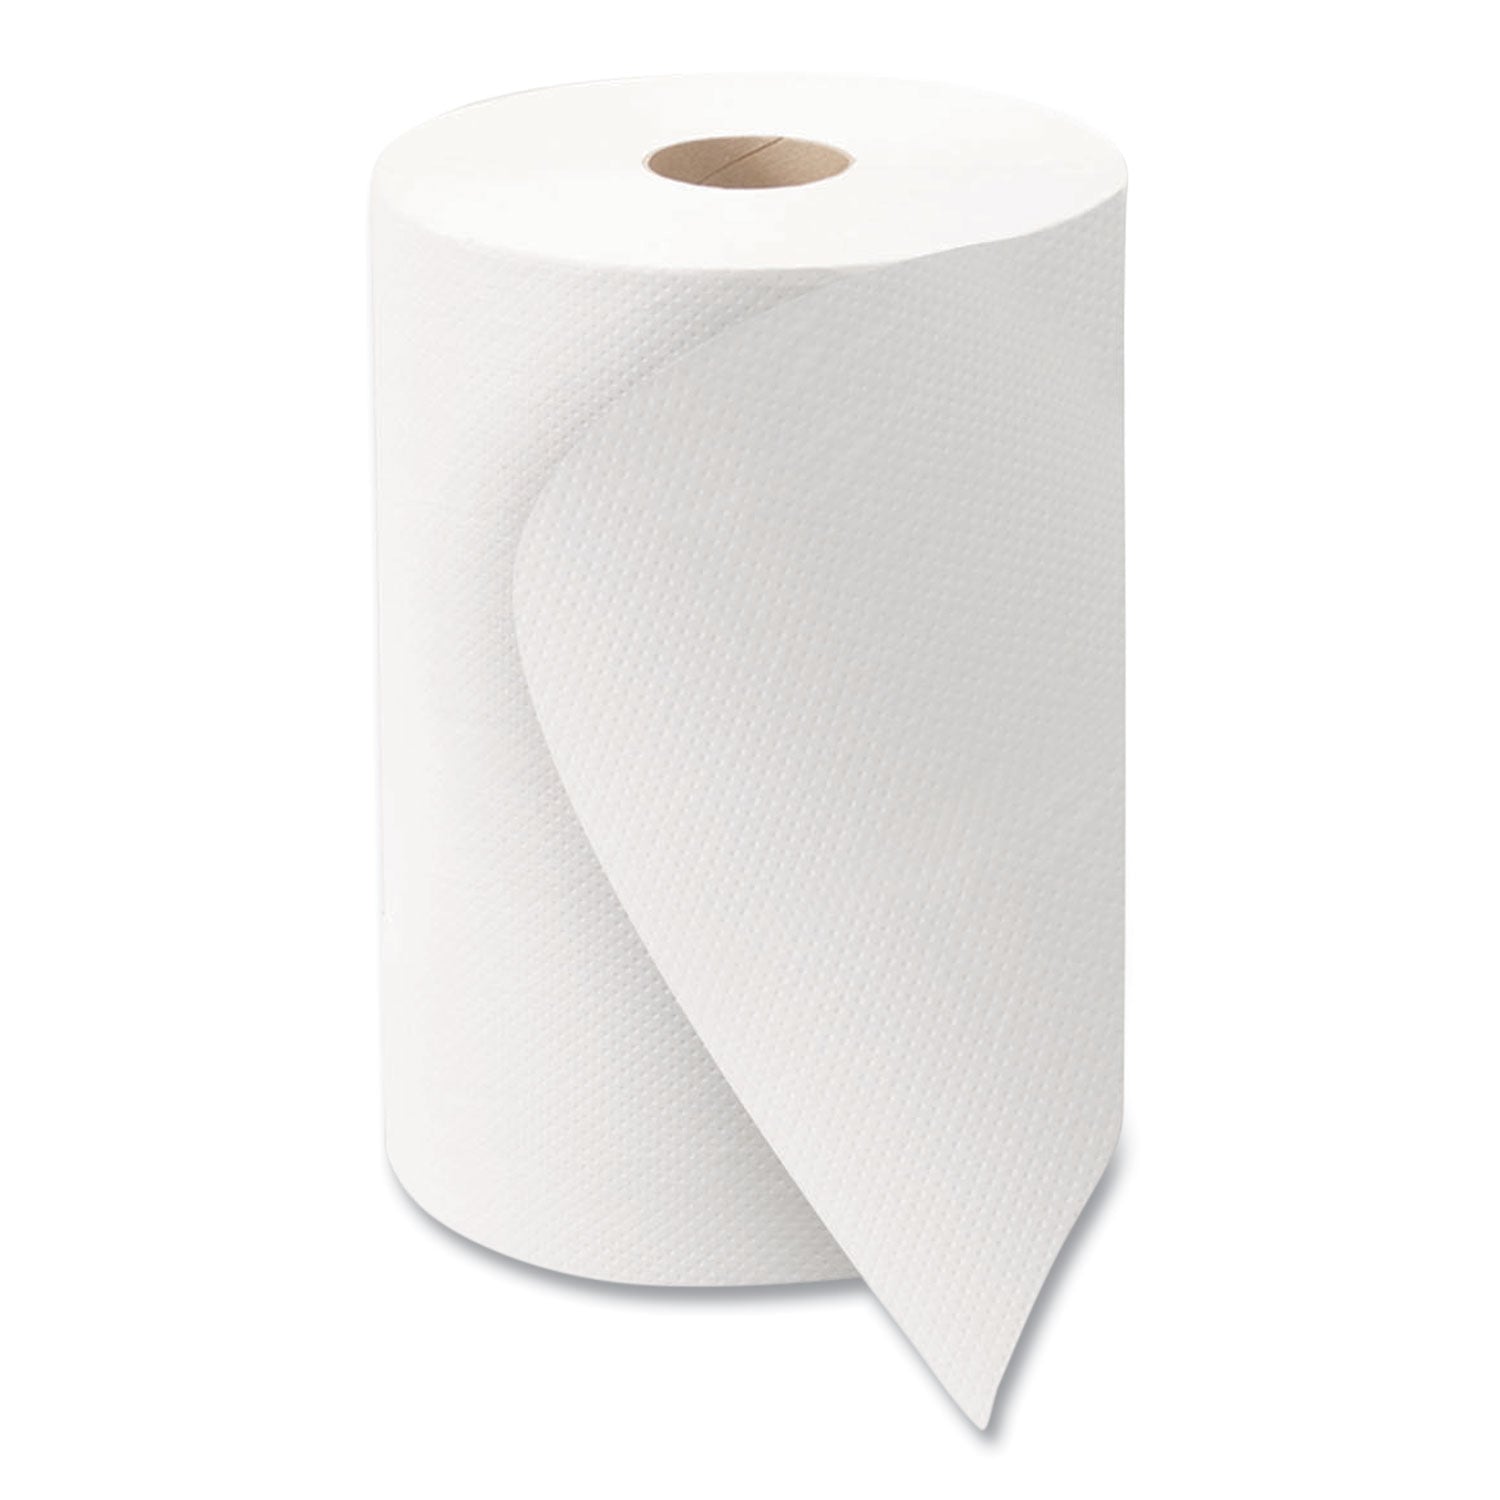 10-inch-roll-towels-1-ply-10-x-800-ft-white-6-rolls-carton_morw106 - 6